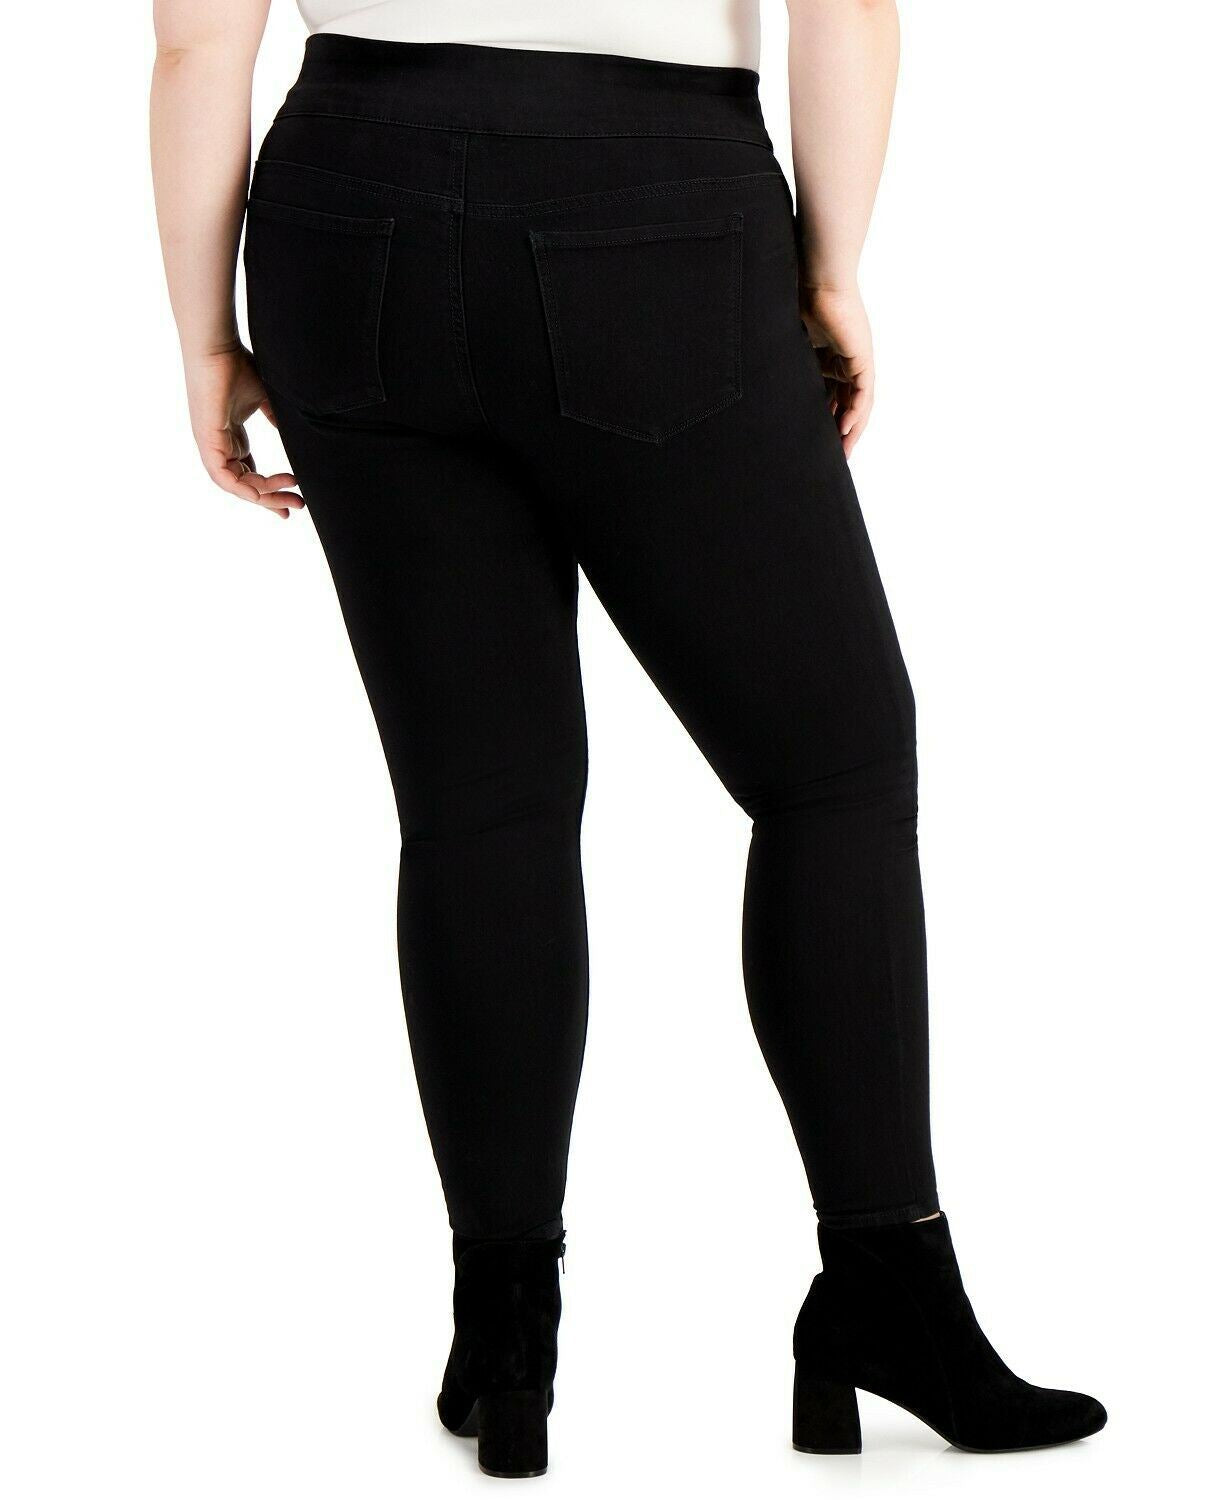 Style & Co. Women Black Pull On Mid Rise Jeggings Jeans Stretch Black ...